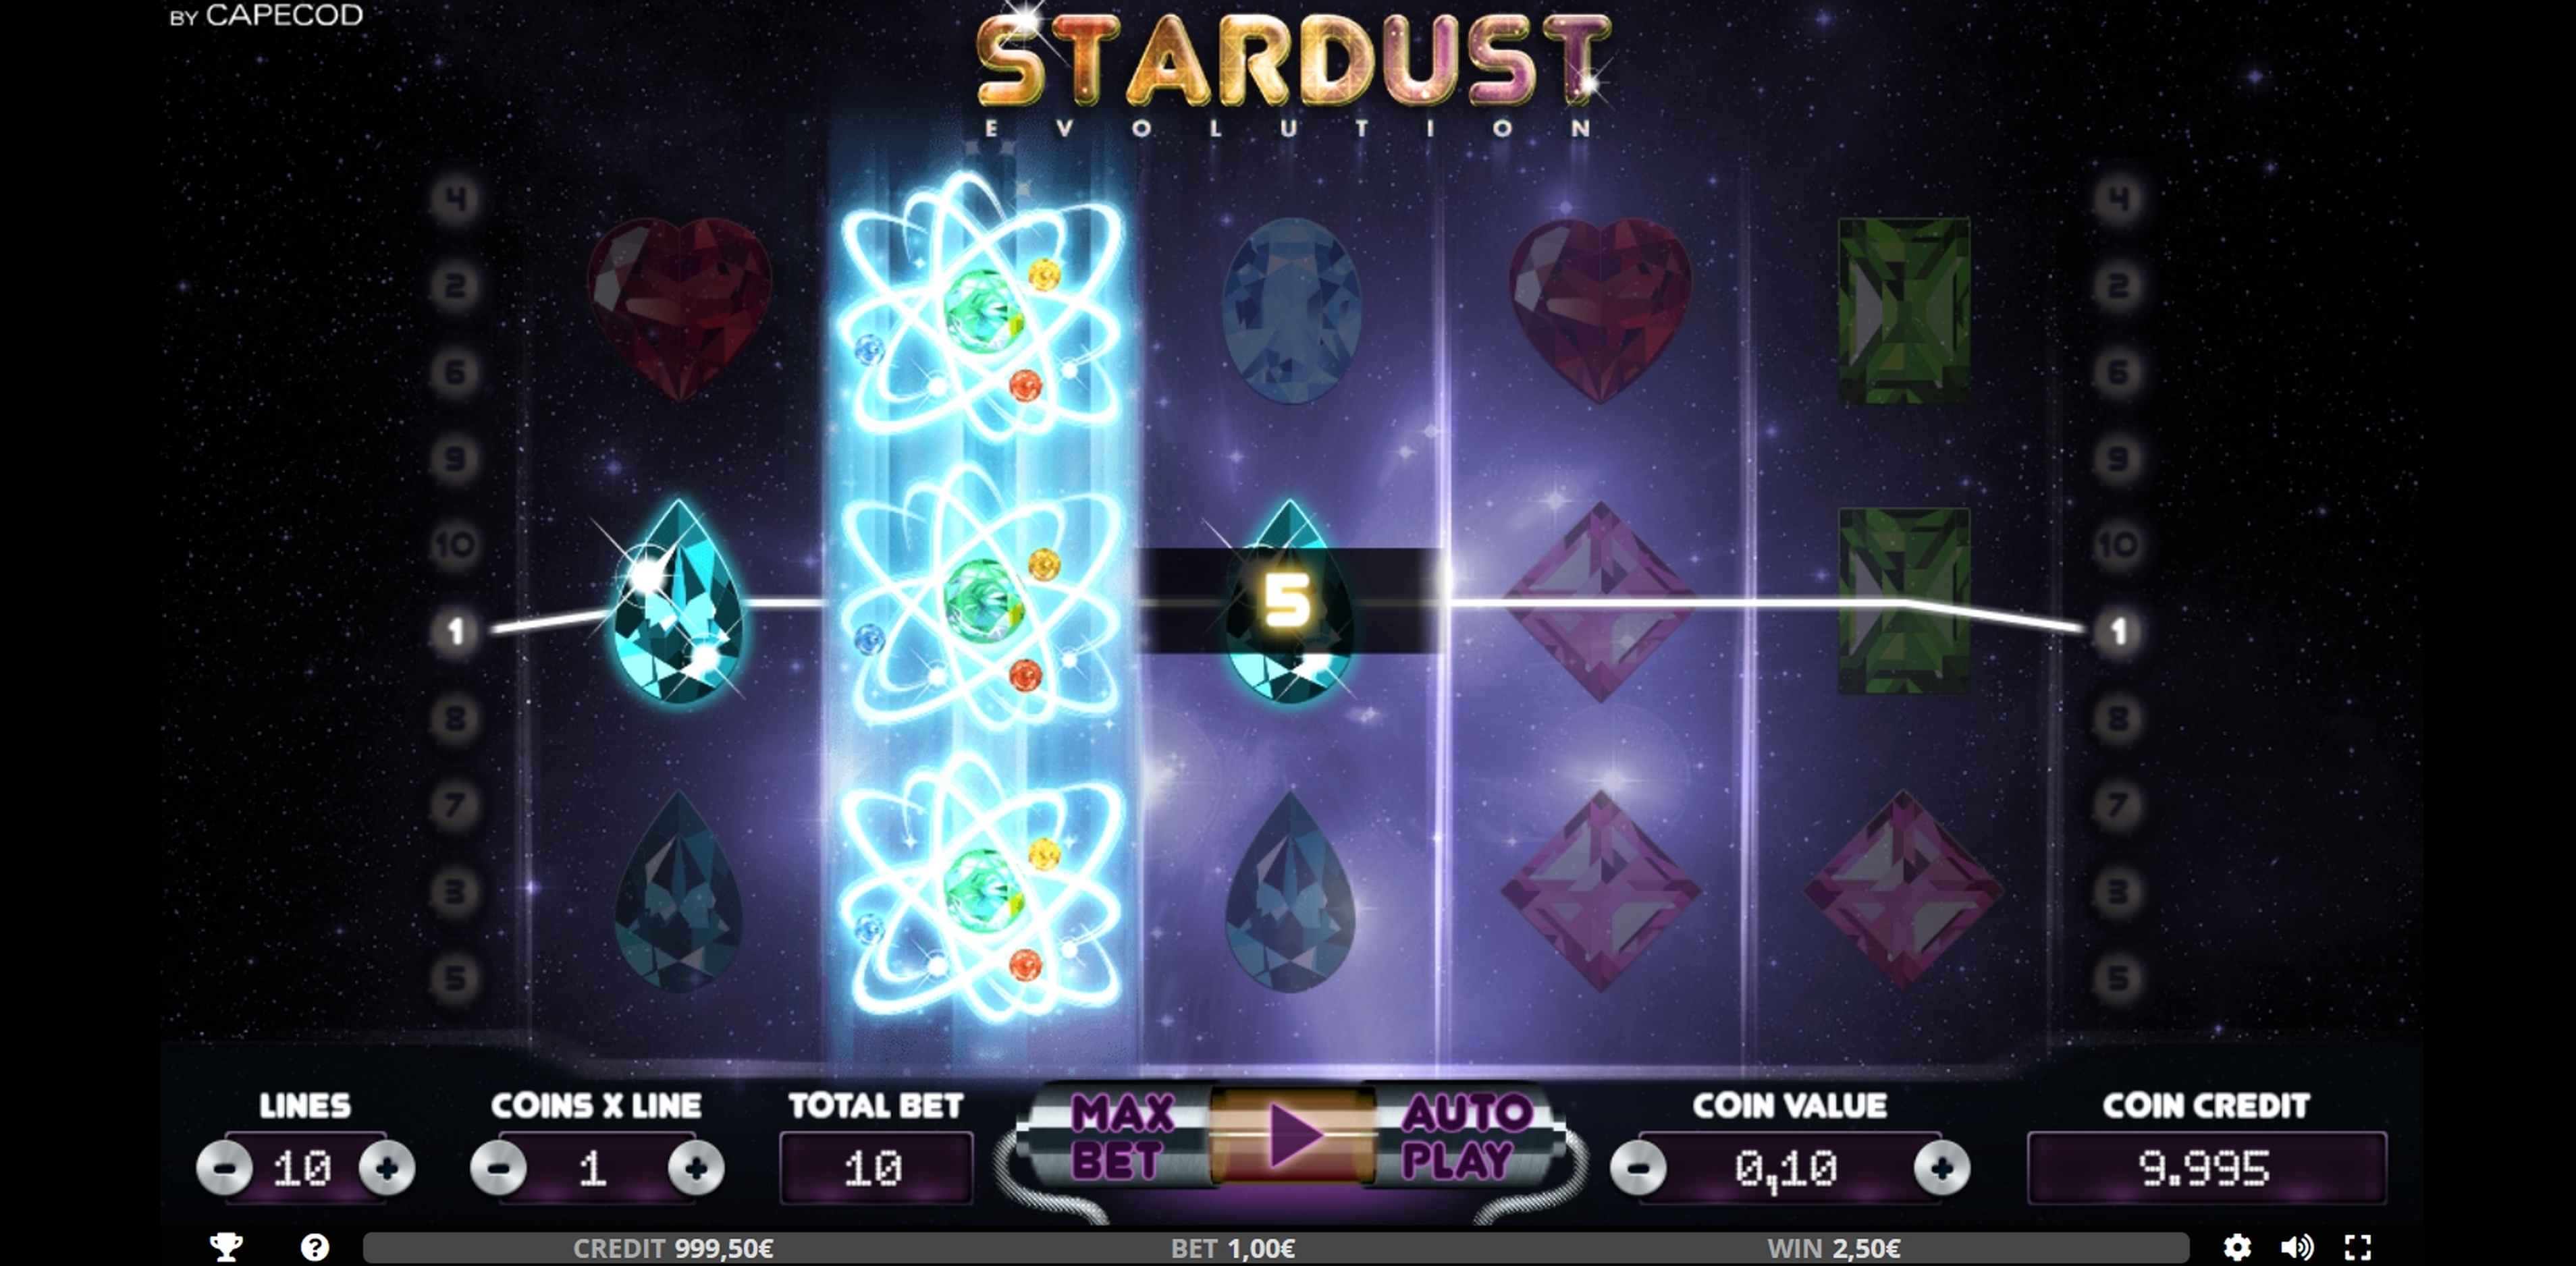 Win Money in Stardust Evolution Free Slot Game by Capecod Gaming